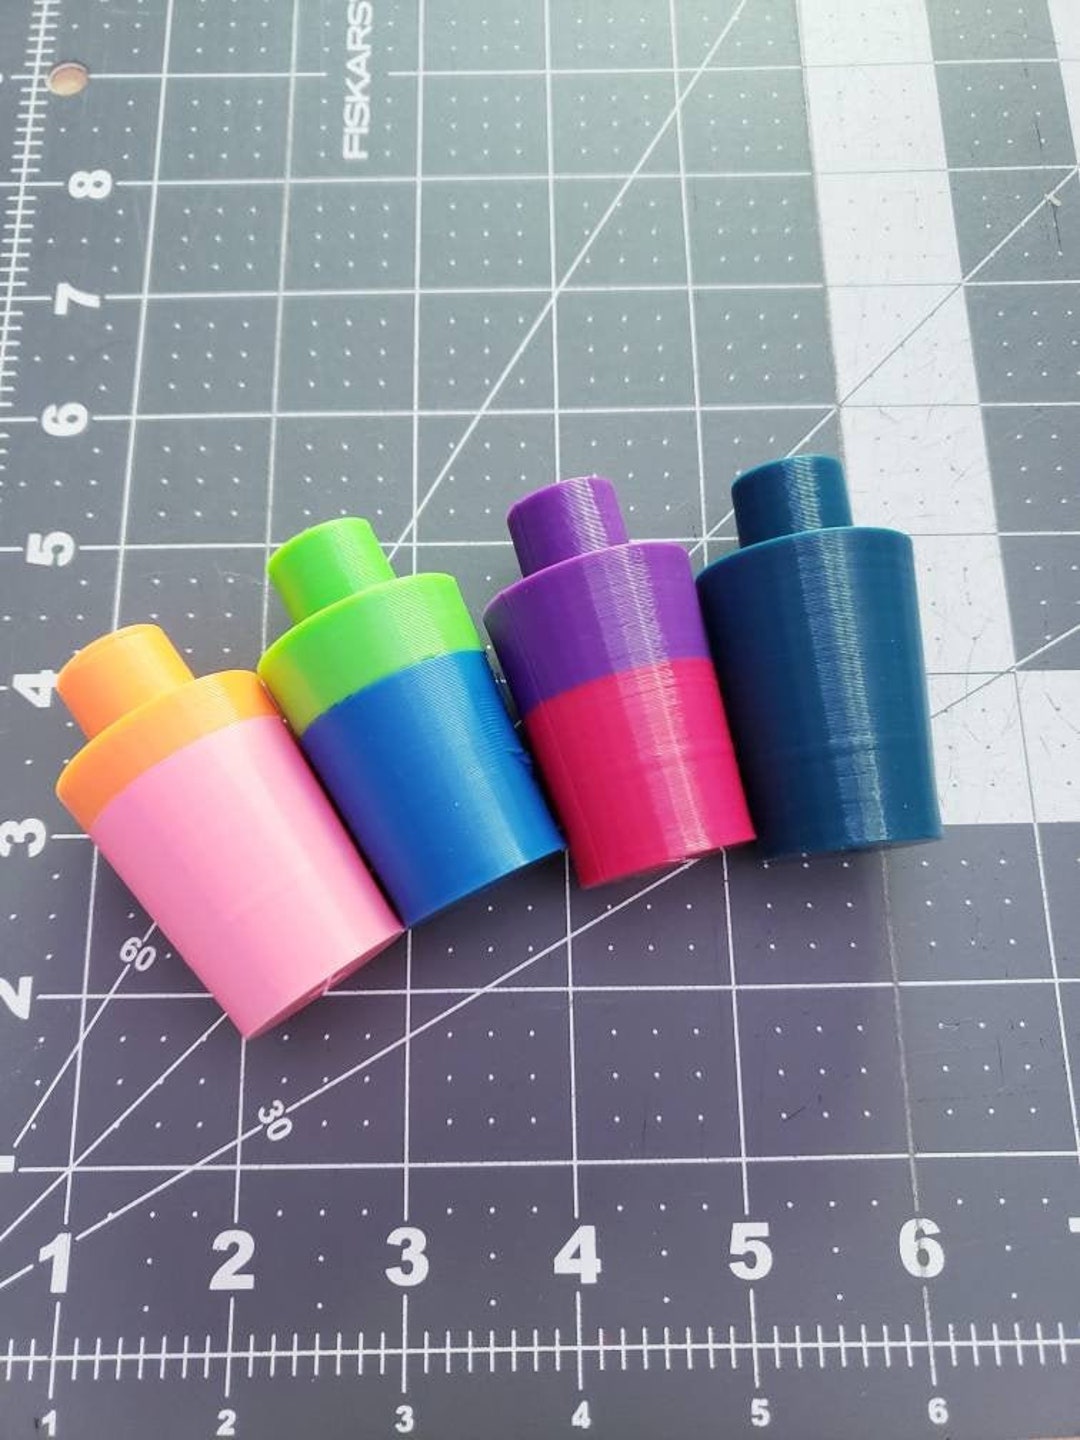 20 Yards Thread Net Spool Saver for Different Sizes of Embroidery Sewing  Quilting and Serger Thread Spools/Cones - Cut into Any Length